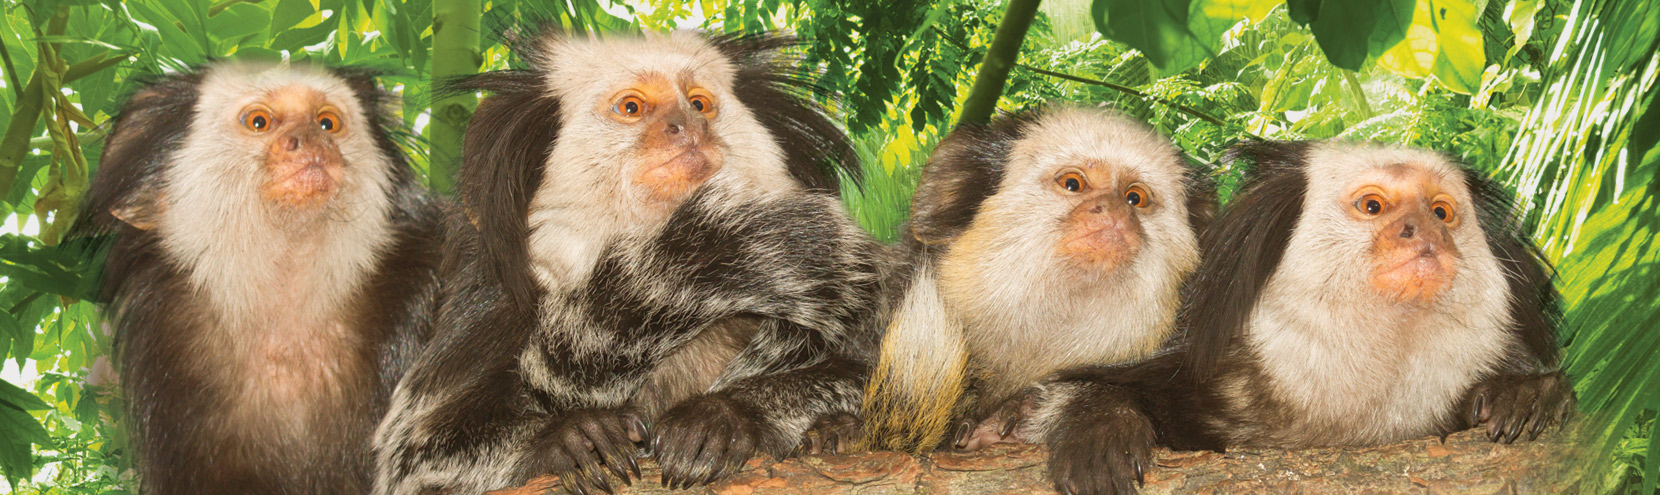 4 Marmosets on a Branch